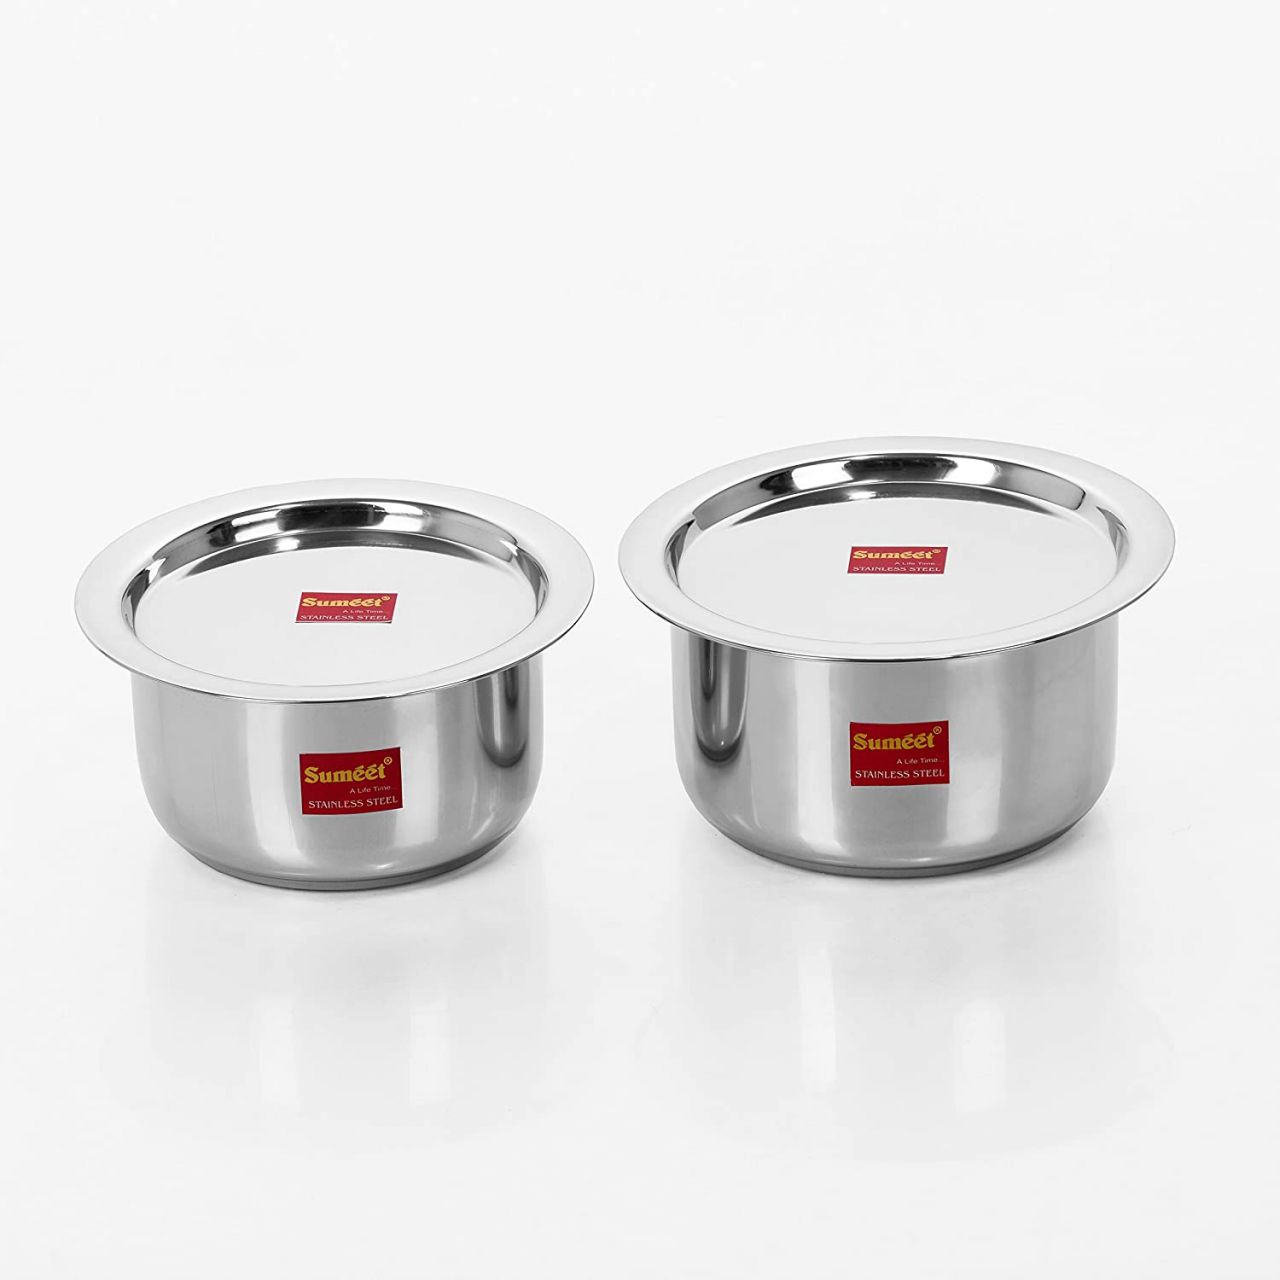 Sumeet Stainless Steel Cookware Set With Lid, 2 Piece (Steel)